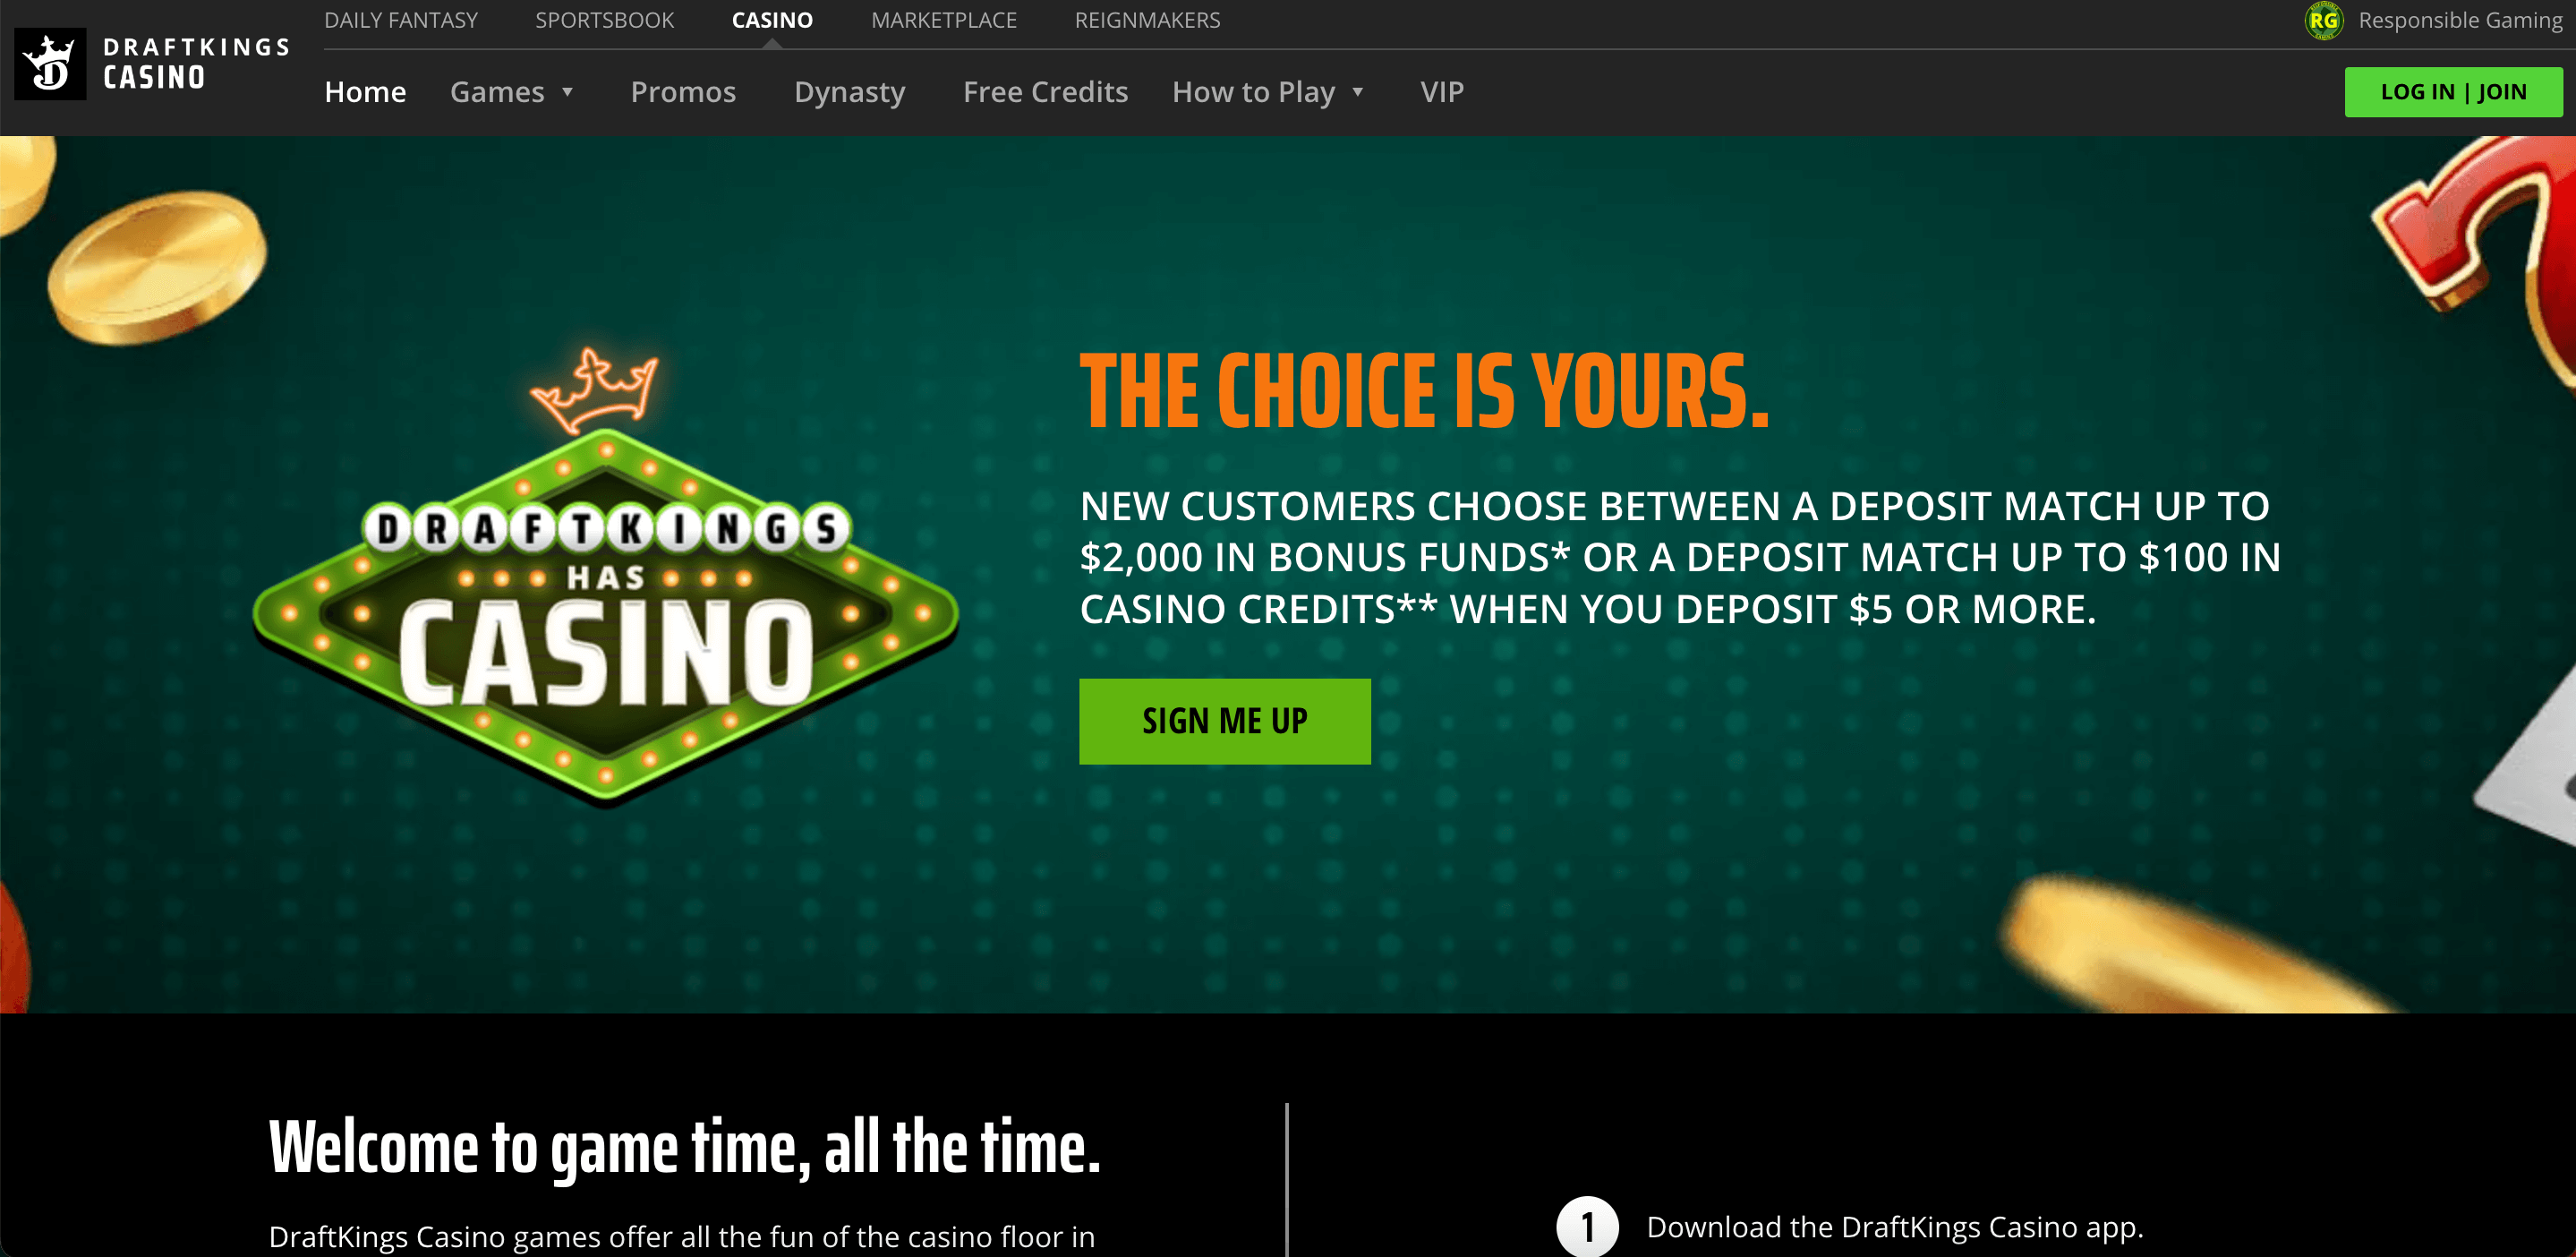 DraftKings Casino NJ Home Page